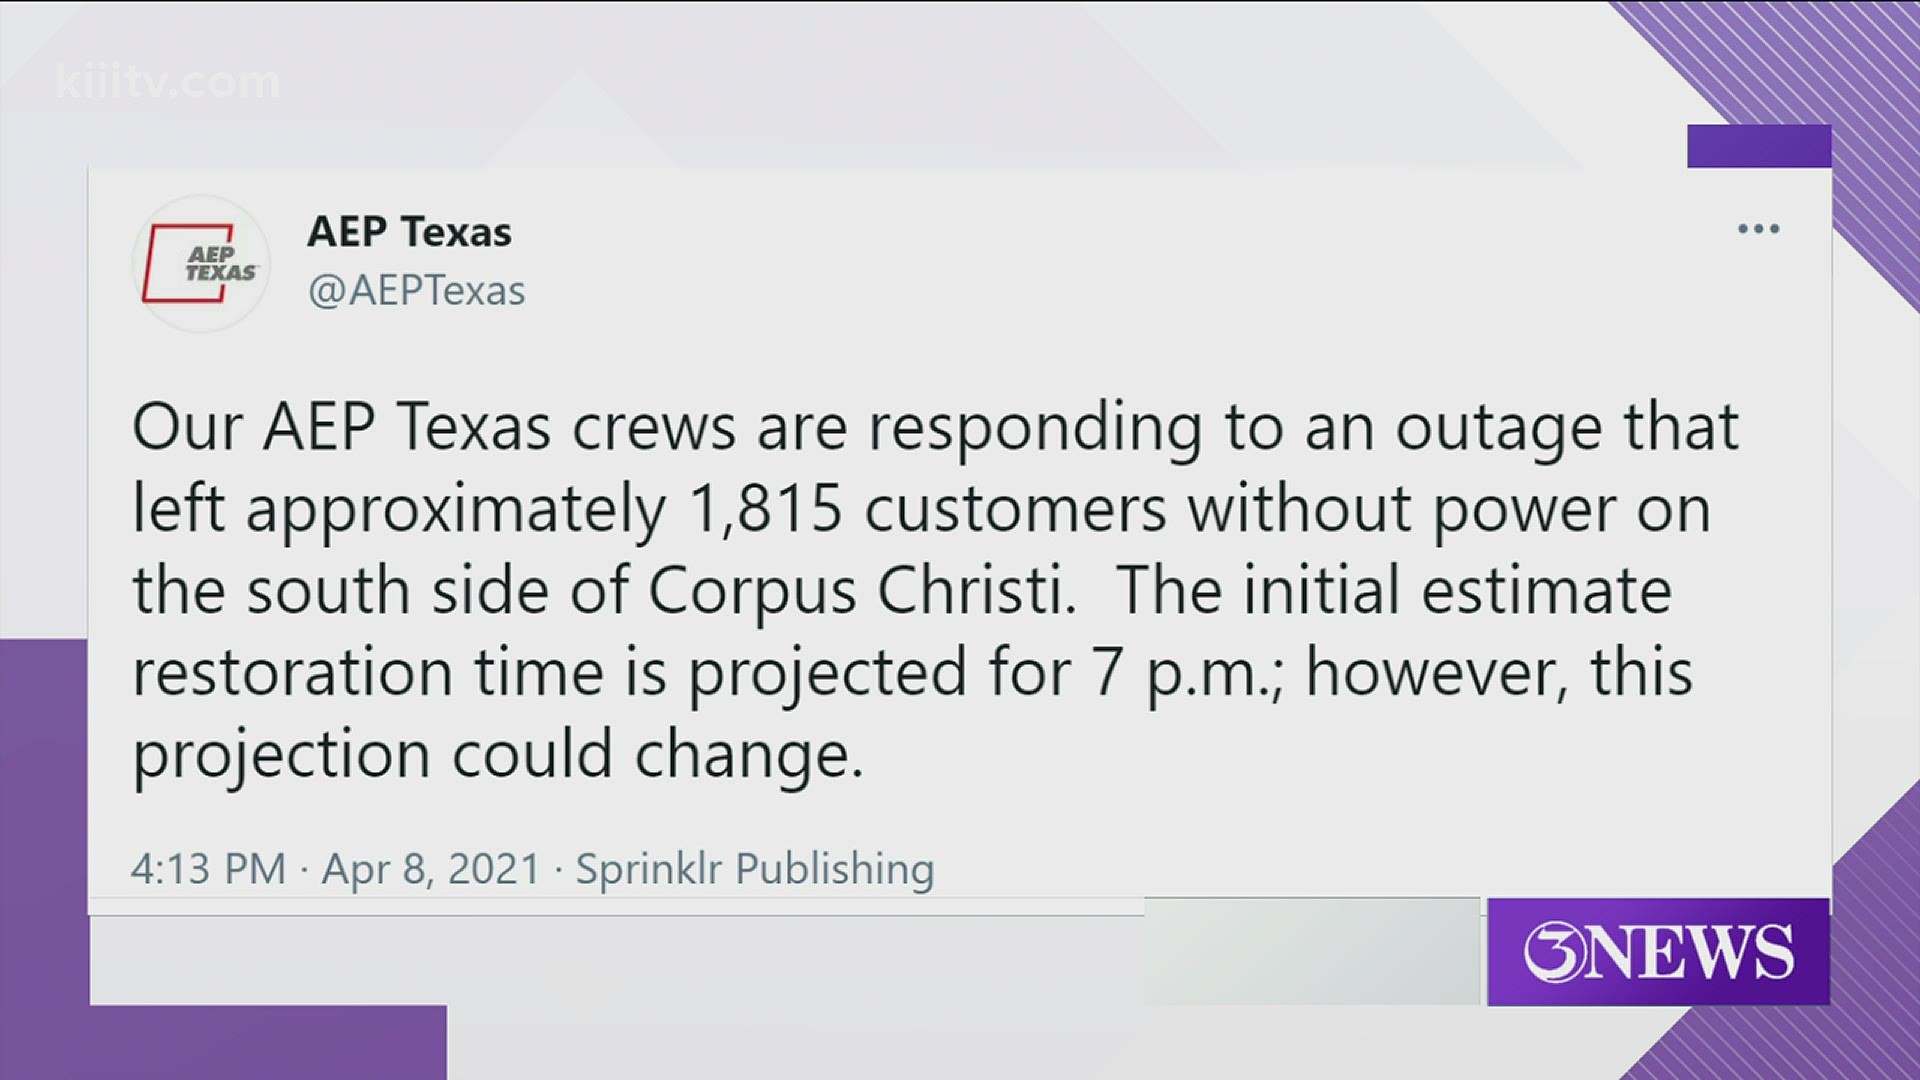 AEP Texas is projecting the restoration time for 7 p.m.